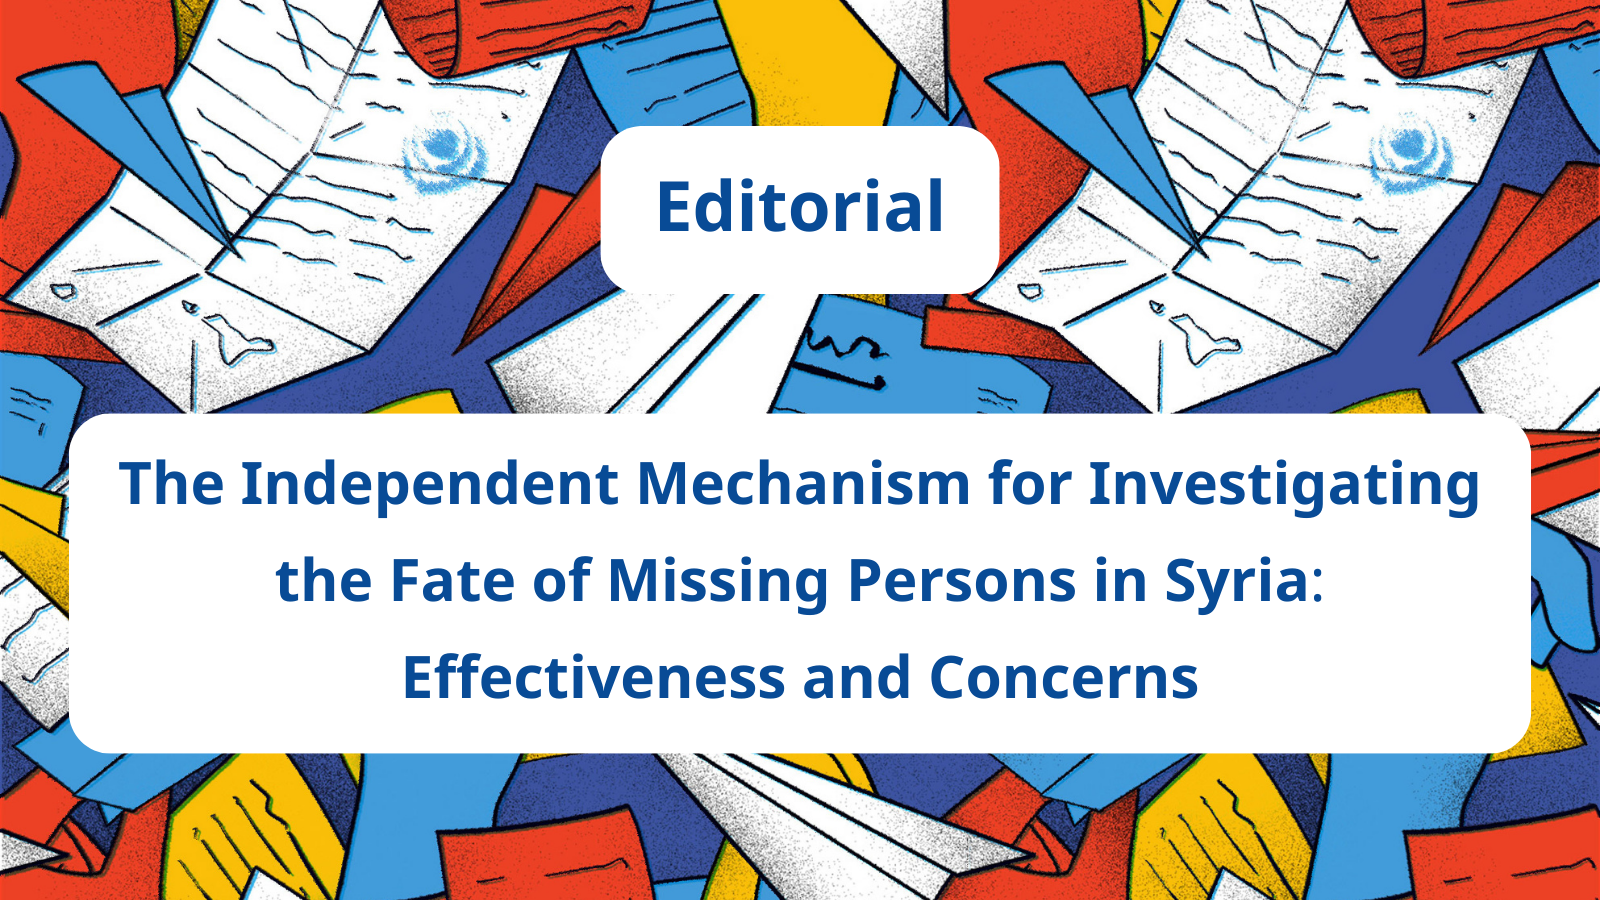 The Independent Mechanism for Investigating the Fate of Missing Persons in Syria: Effectiveness and Concerns